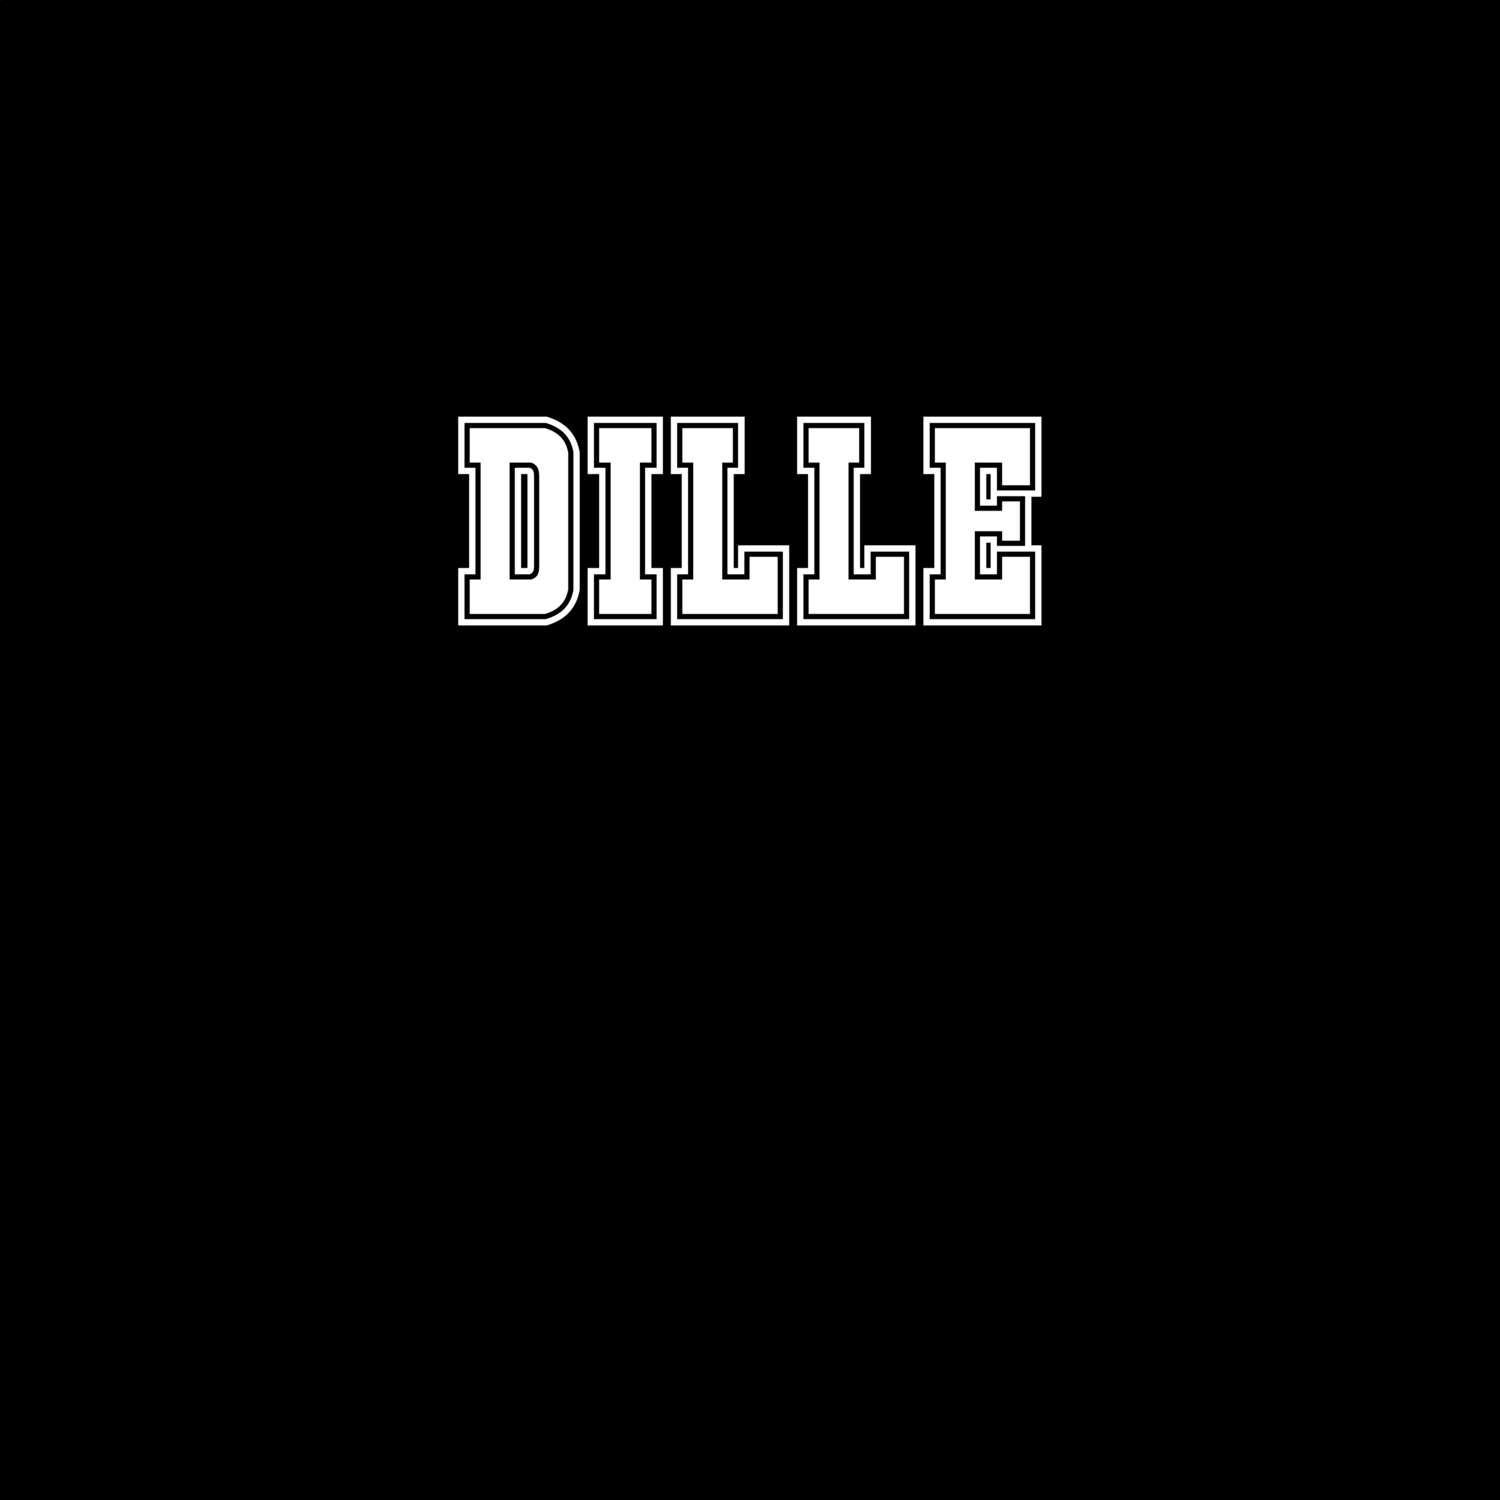 Dille T-Shirt »Classic«